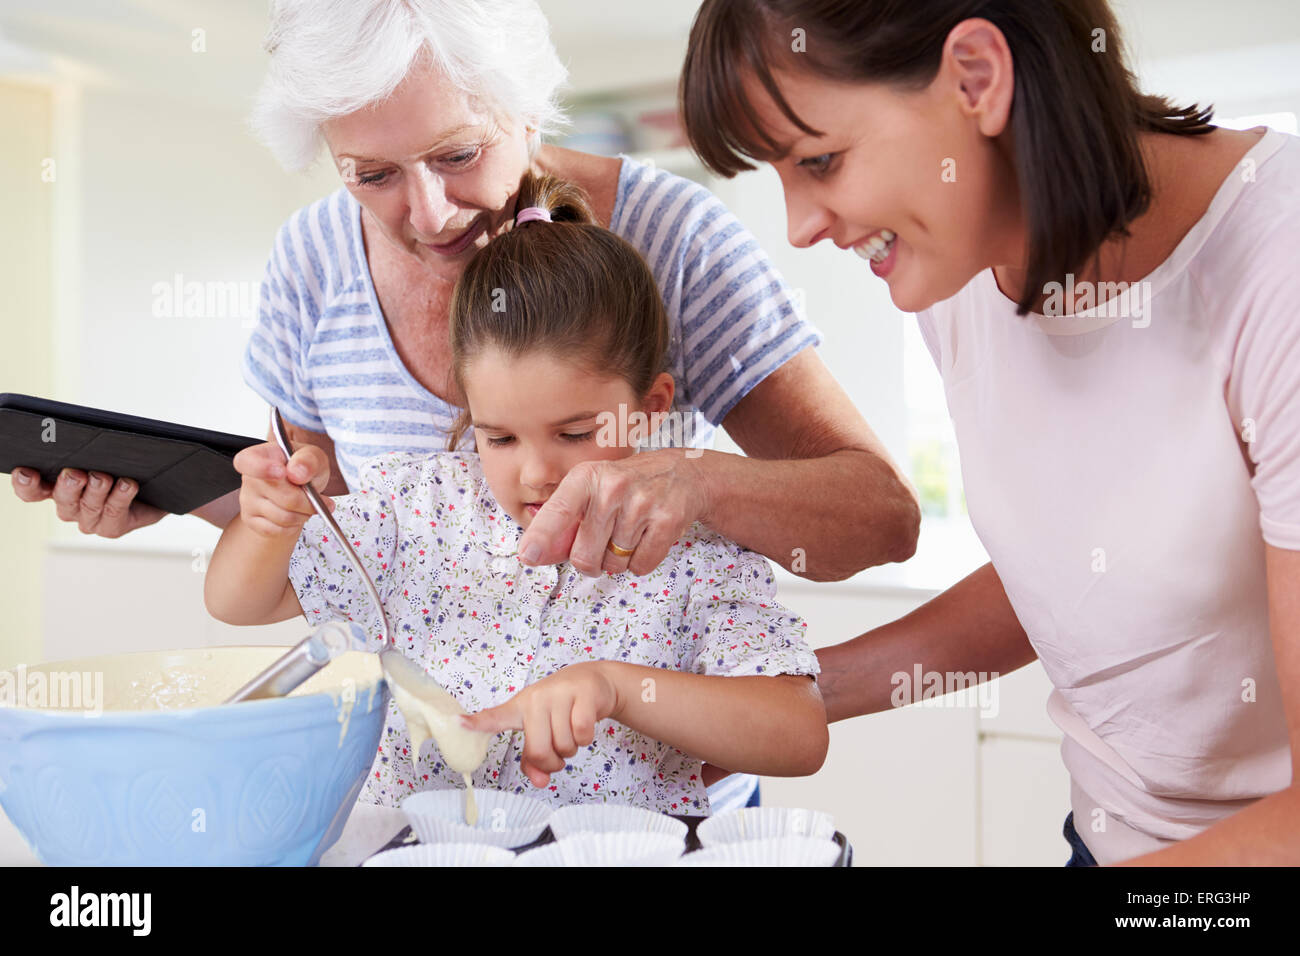 Grandmother, Granddaughter And Mother Baking Cake In Kitchen Stock Photo